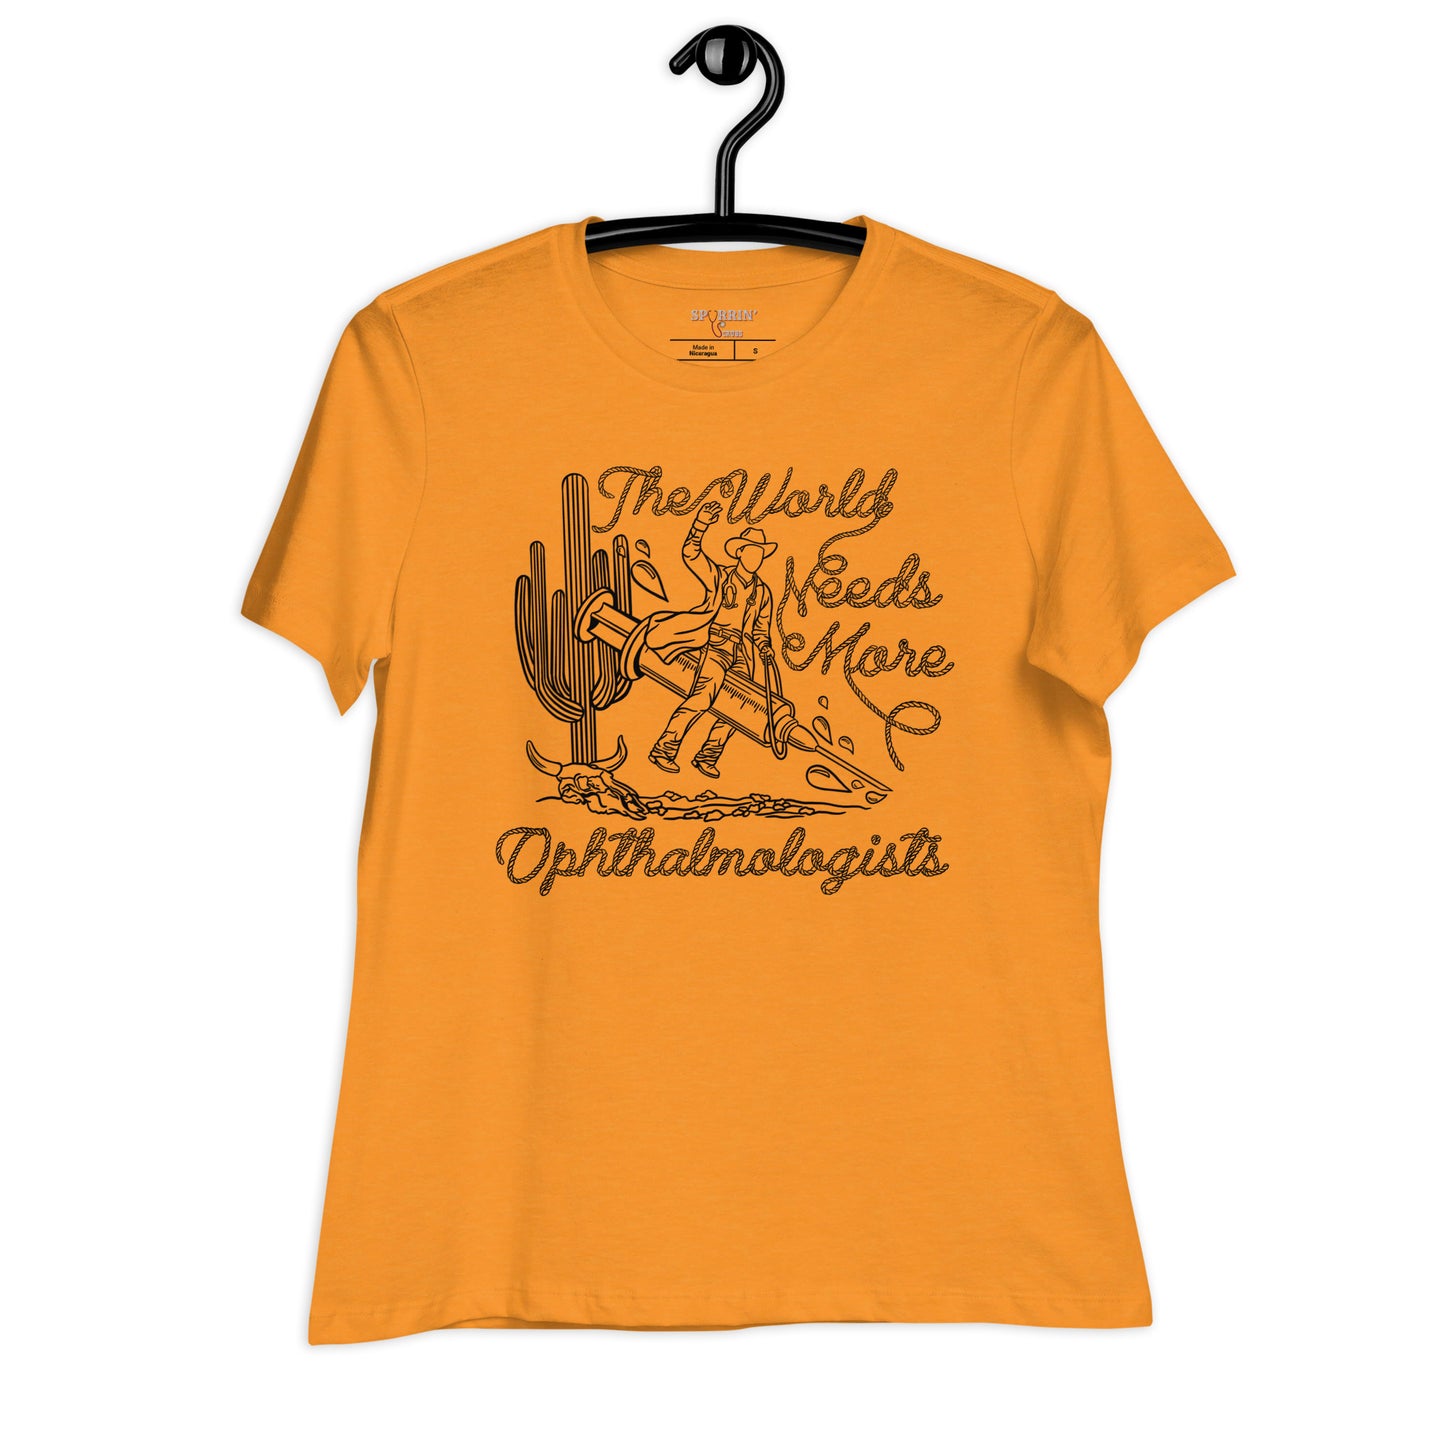 TWNM- Ophthalmologists Relaxed T- Shirt Light Colors